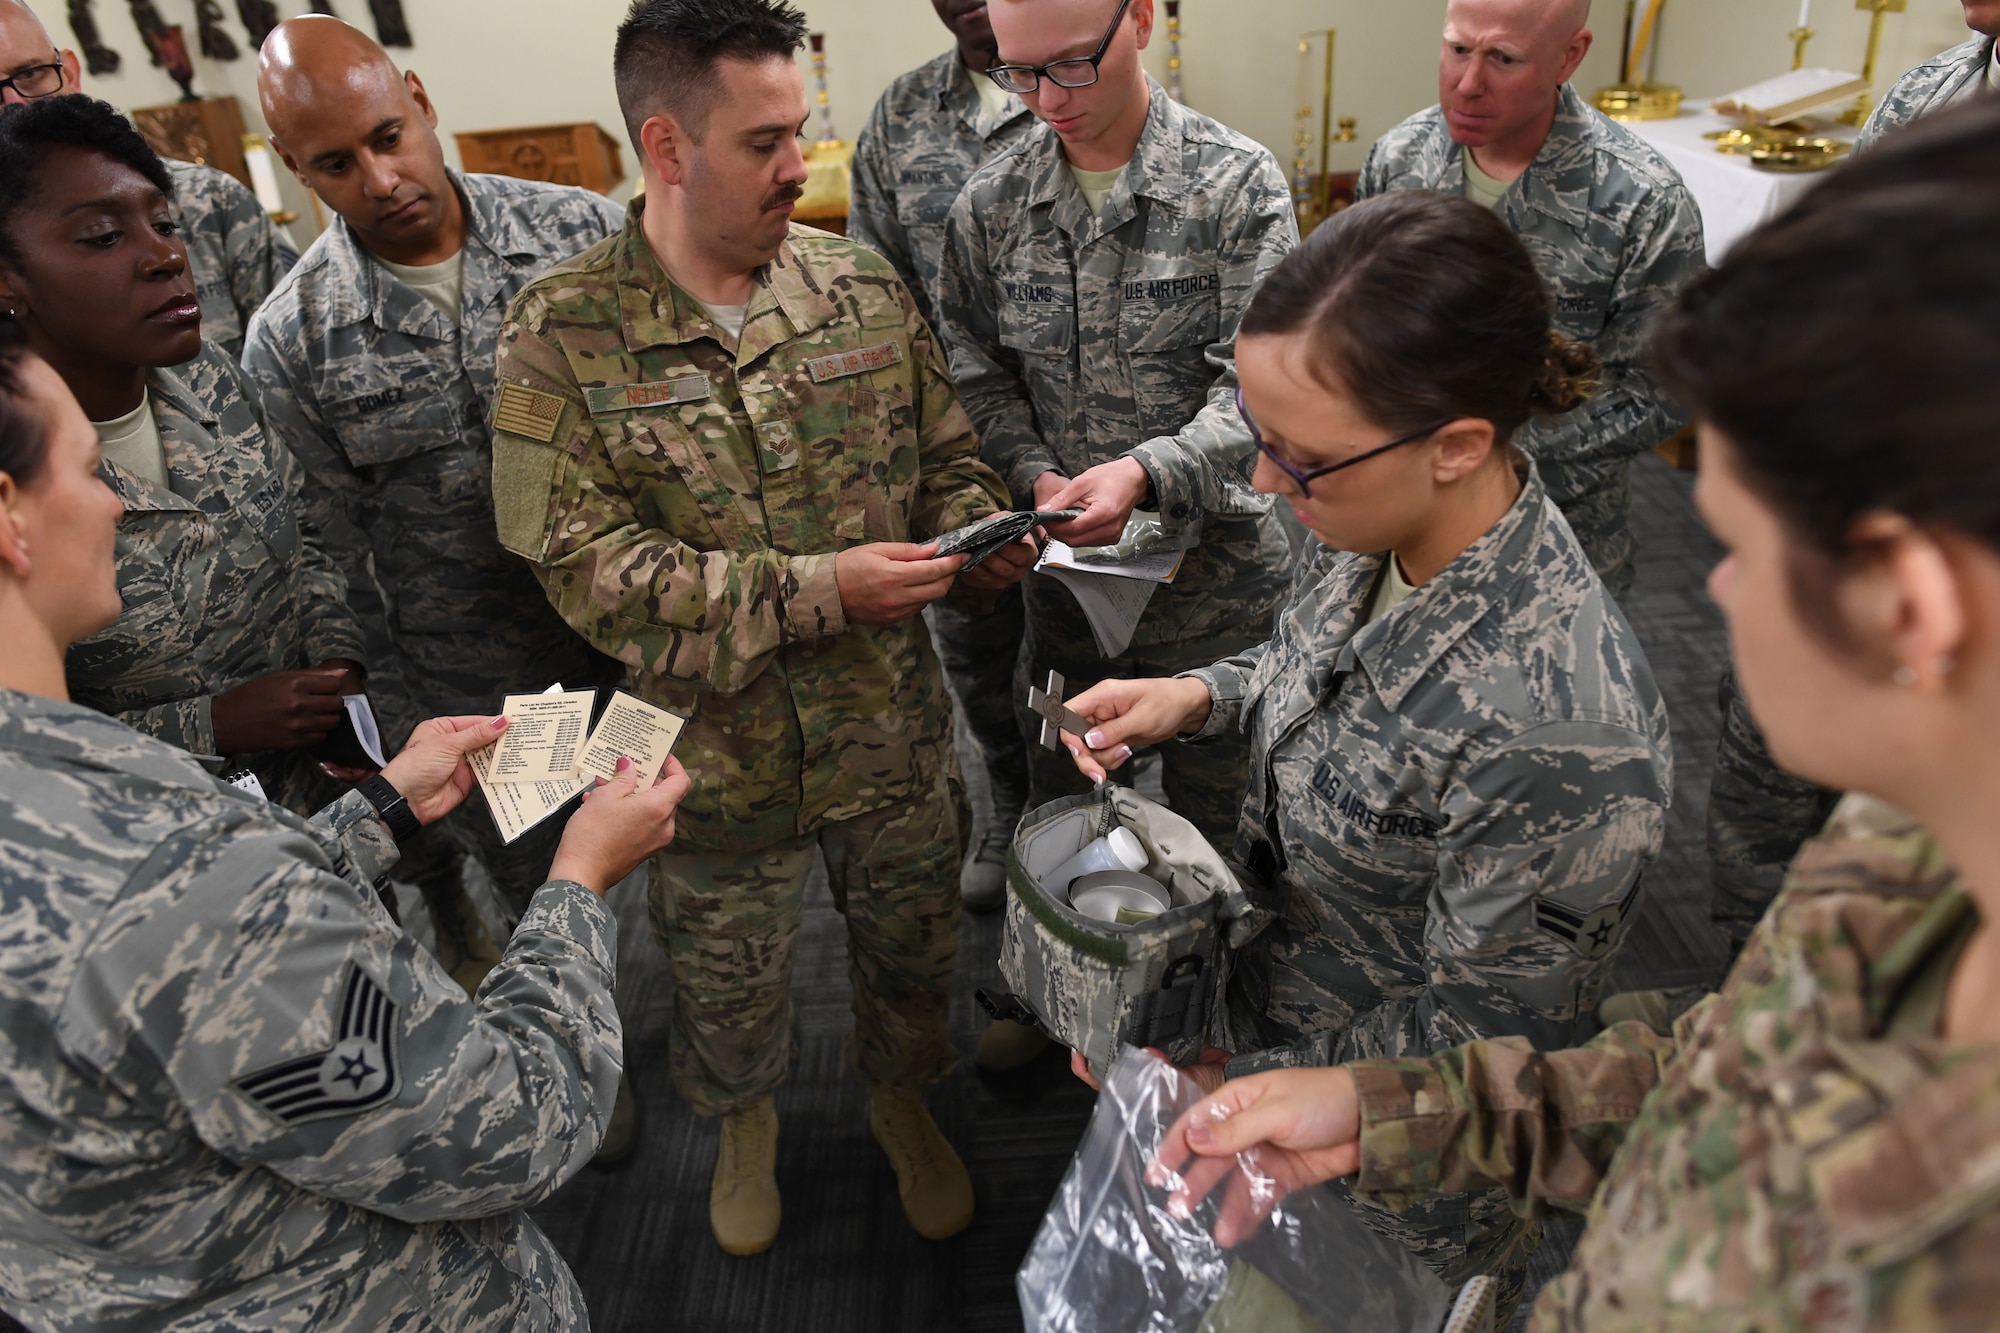 Airmen in the 335th Training Squadron religious affairs course view items in a chaplain's deployment kit inside Allee Hall at Keesler Air Force Base, Mississippi, Oct. 17, 2019. The six-week-long technical training course has been relocated and revamped to improve the training of their enlisted Airmen. (U.S. Air Force photo by Kemberly Groue)